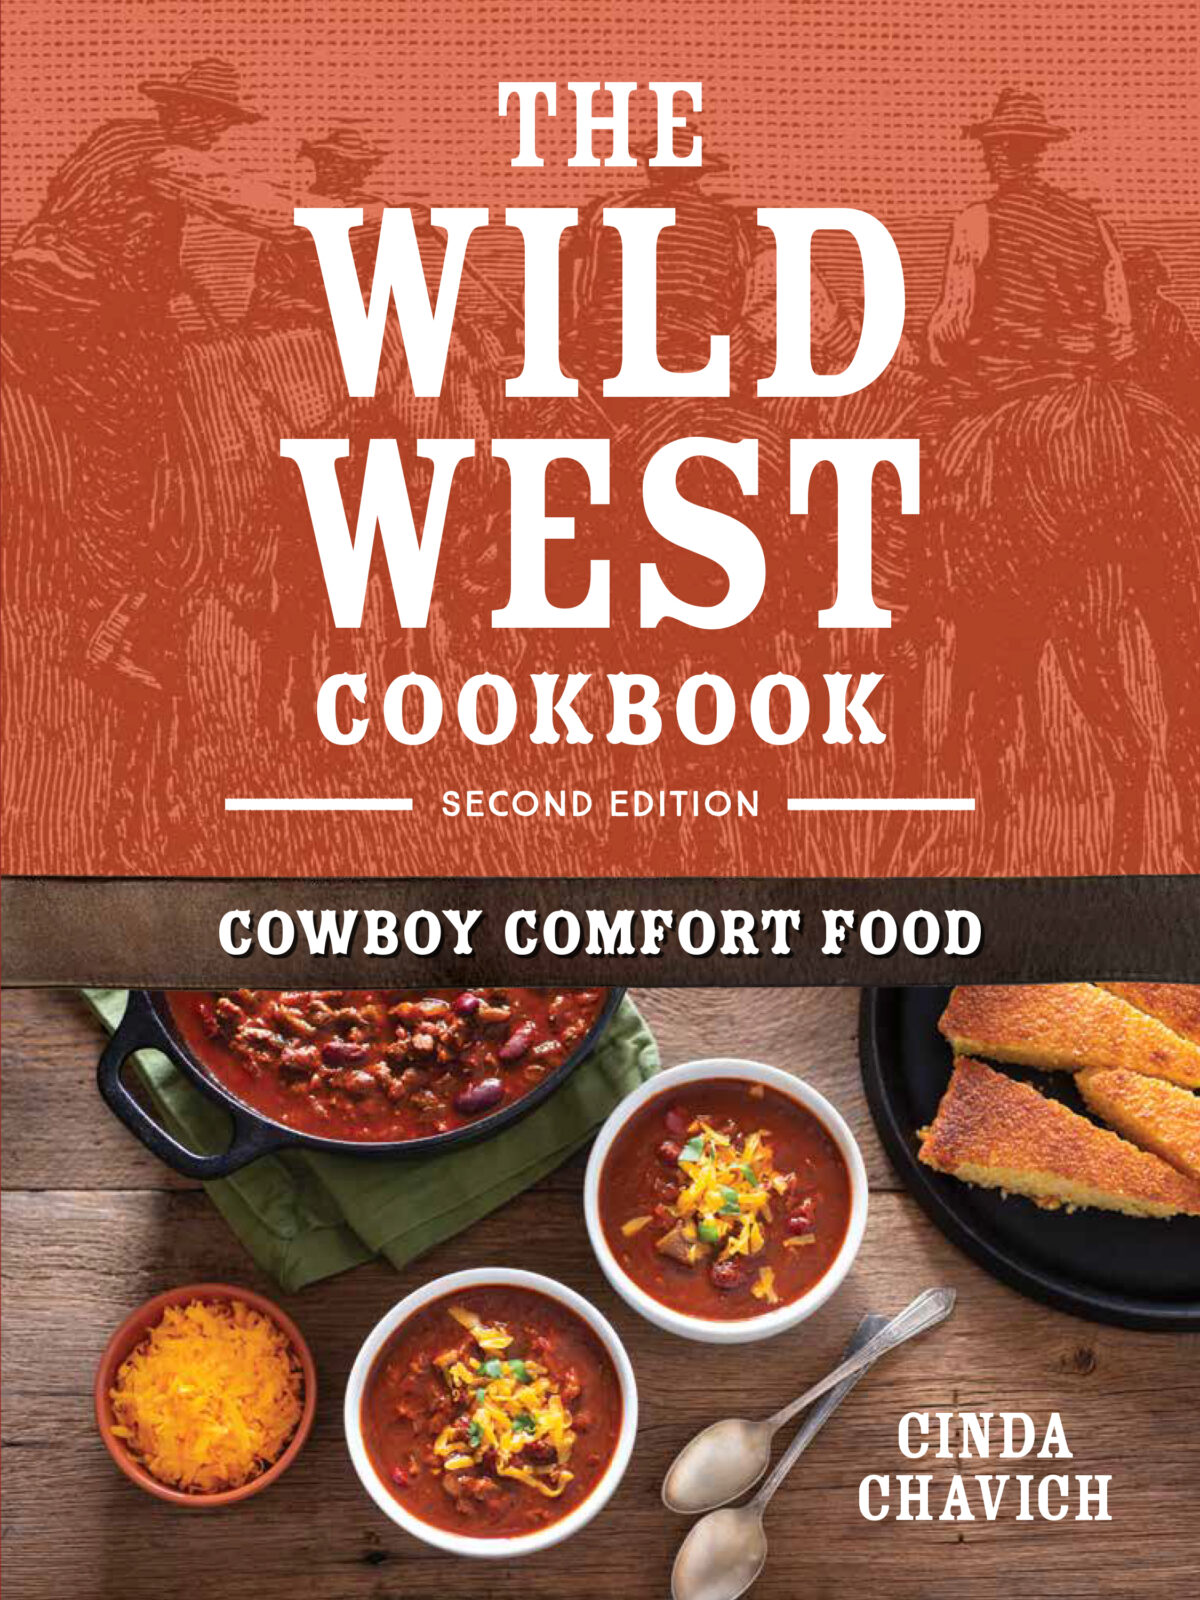 The Wild West Cookbook 2nd ed.